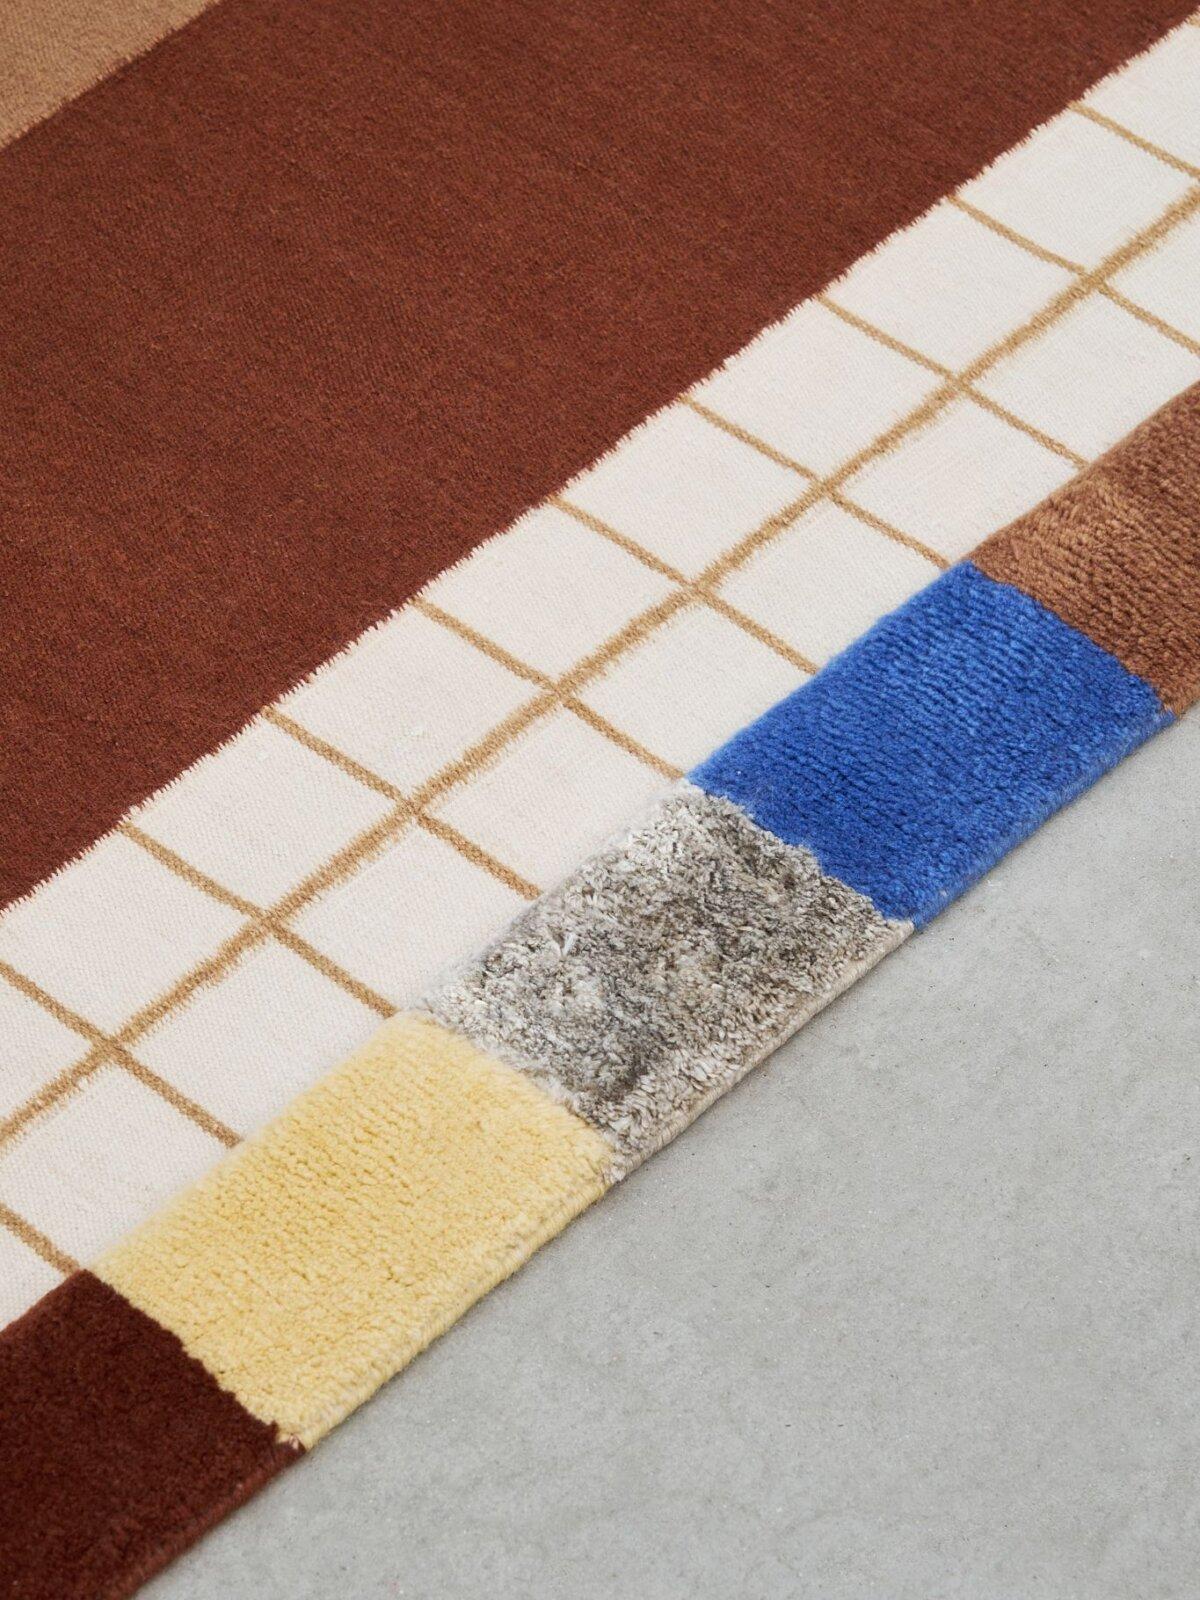 Raag is a rug designed by Doshi Levien studio for the CC-Tapis brand. Raag is a rug from the Raag Collection, which consists of rugs that feature a distinctive theme based on grids and geometric elements, giving its design a sophisticated